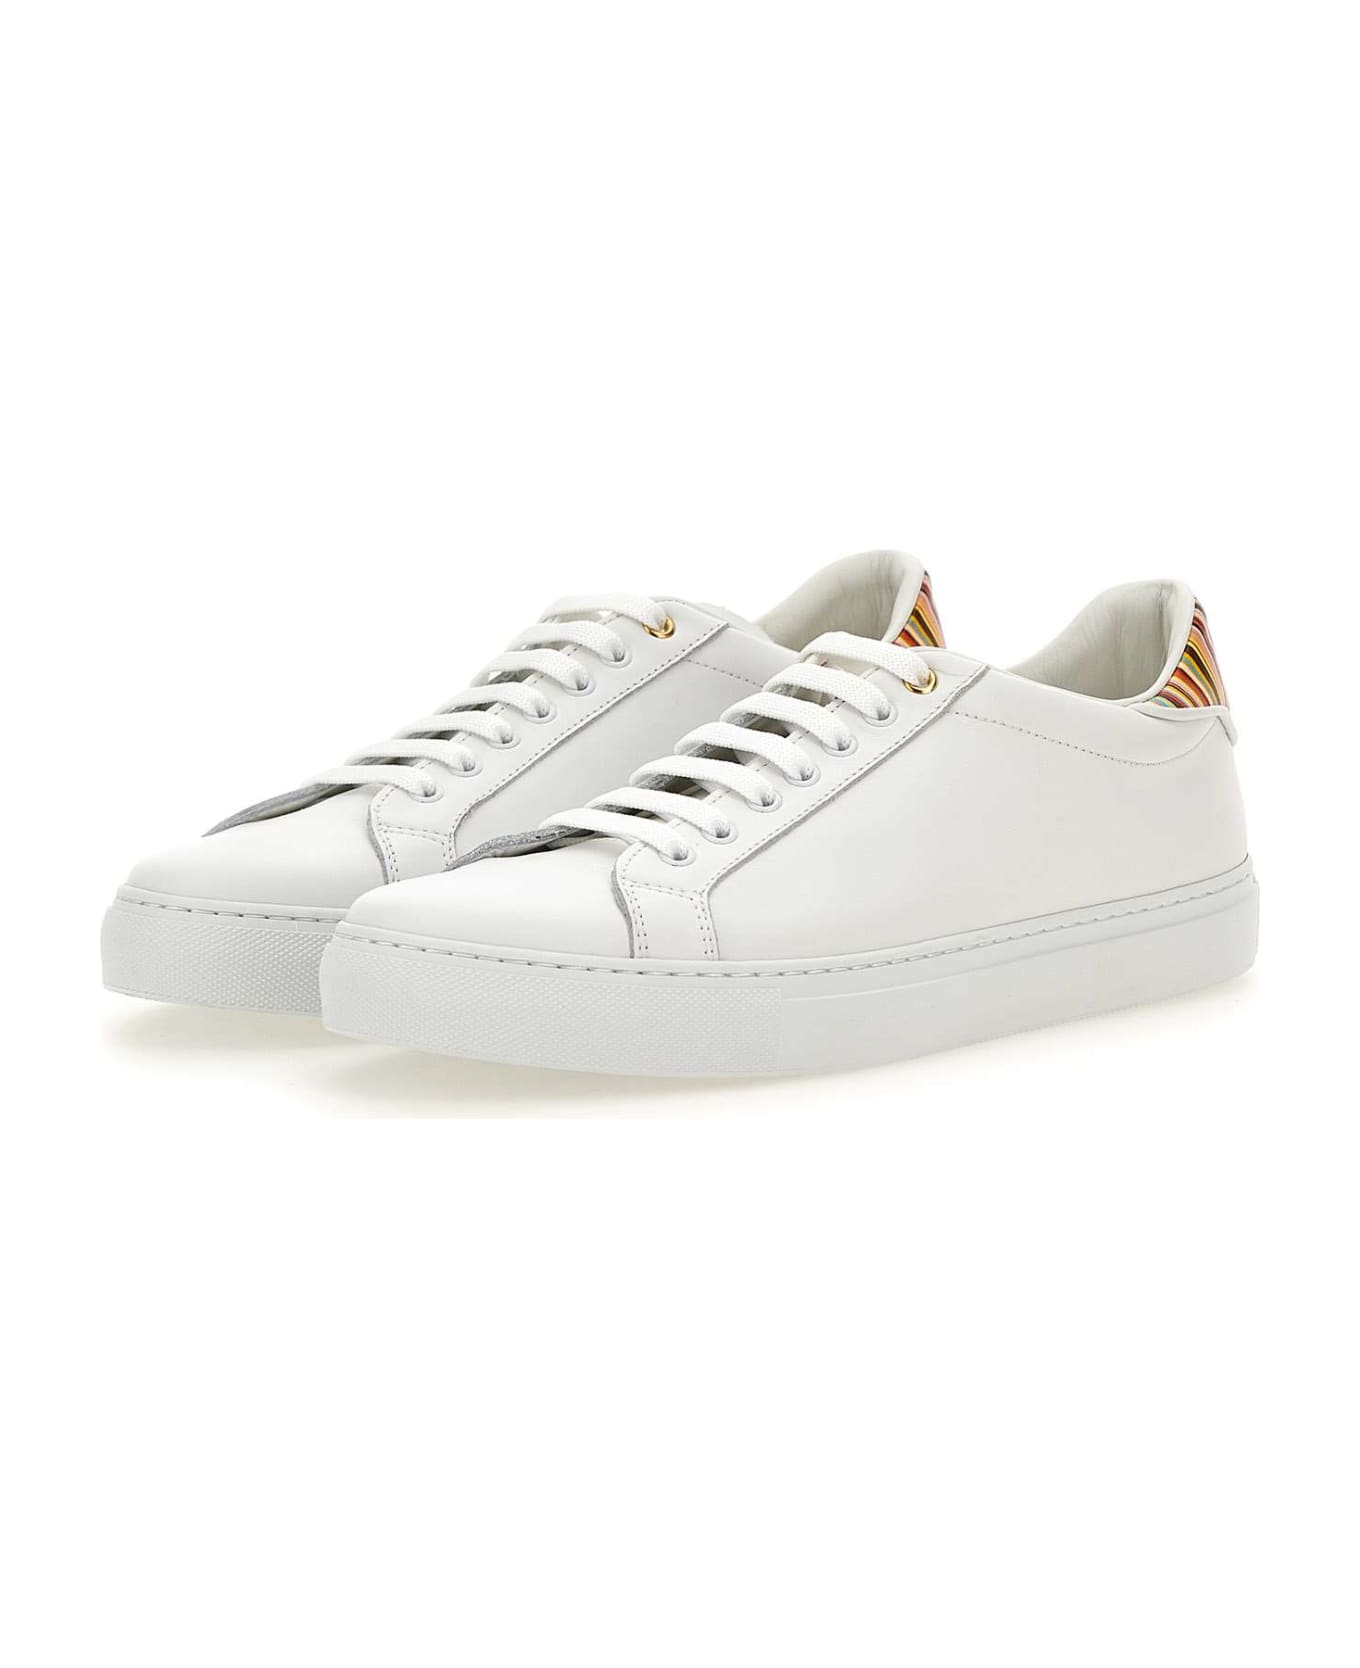 Paul Smith "beck" Sneakers - WHITE